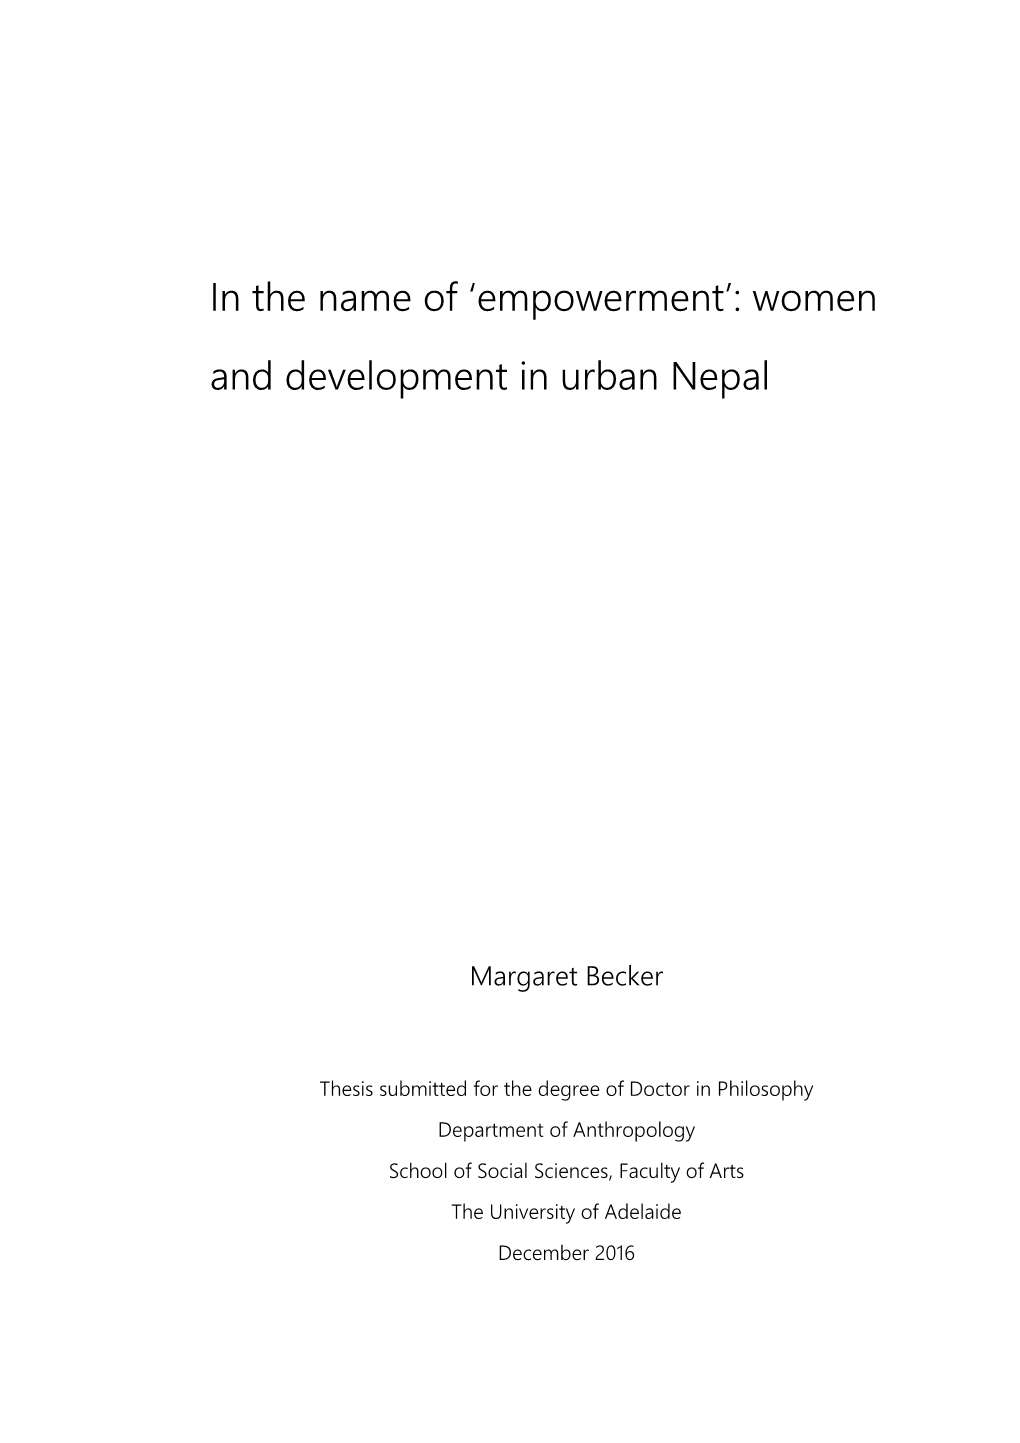 In the Name of 'Empowerment': Women and Development in Urban Nepal